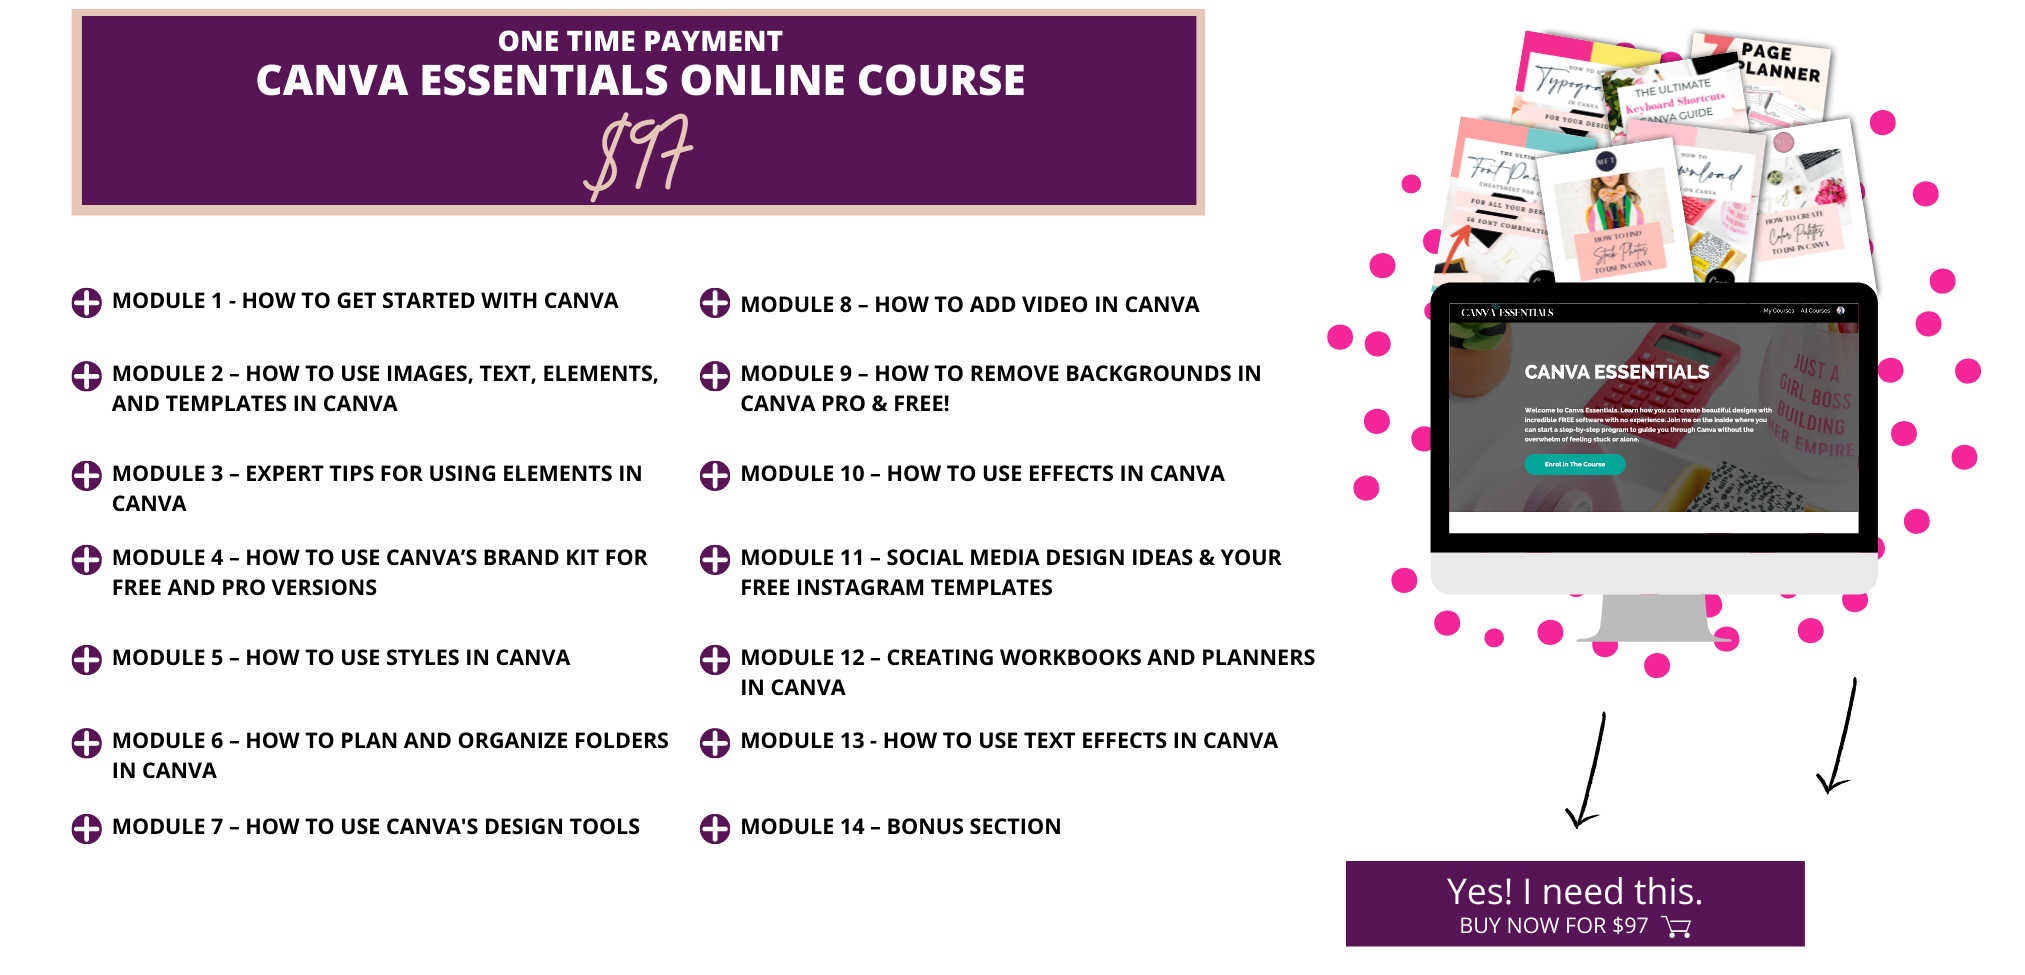 Canva essentials online course the step-by-step program to guide you through all the essentials you need even with zero design skills